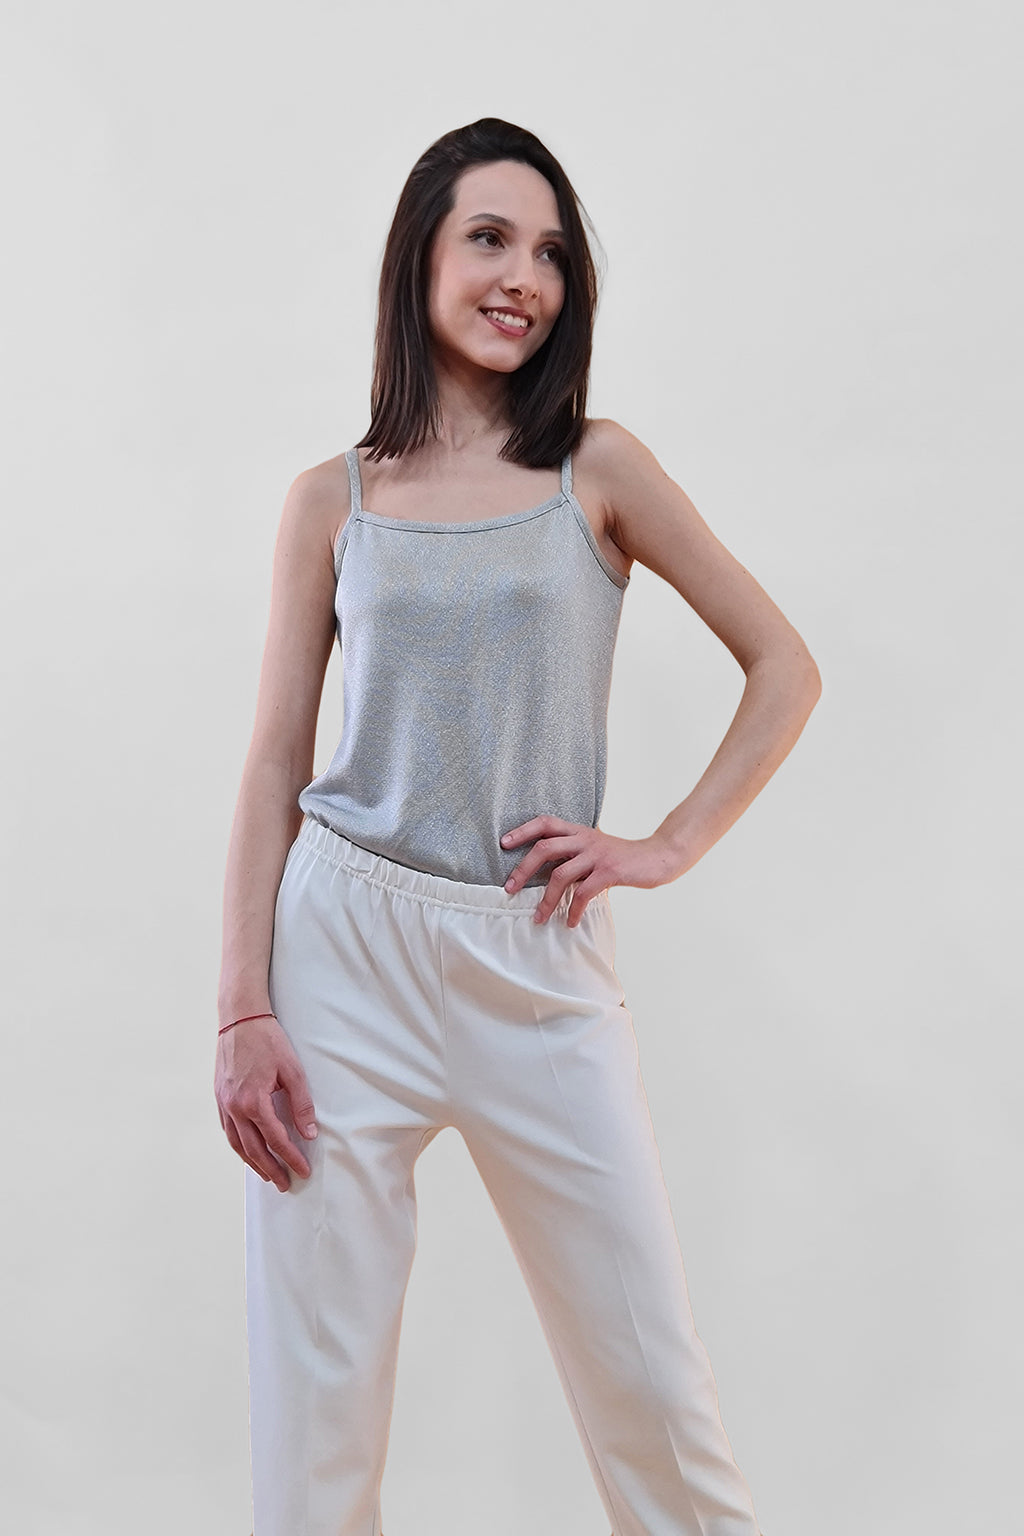 Woman models gray tank top and white high-waisted pants against light background